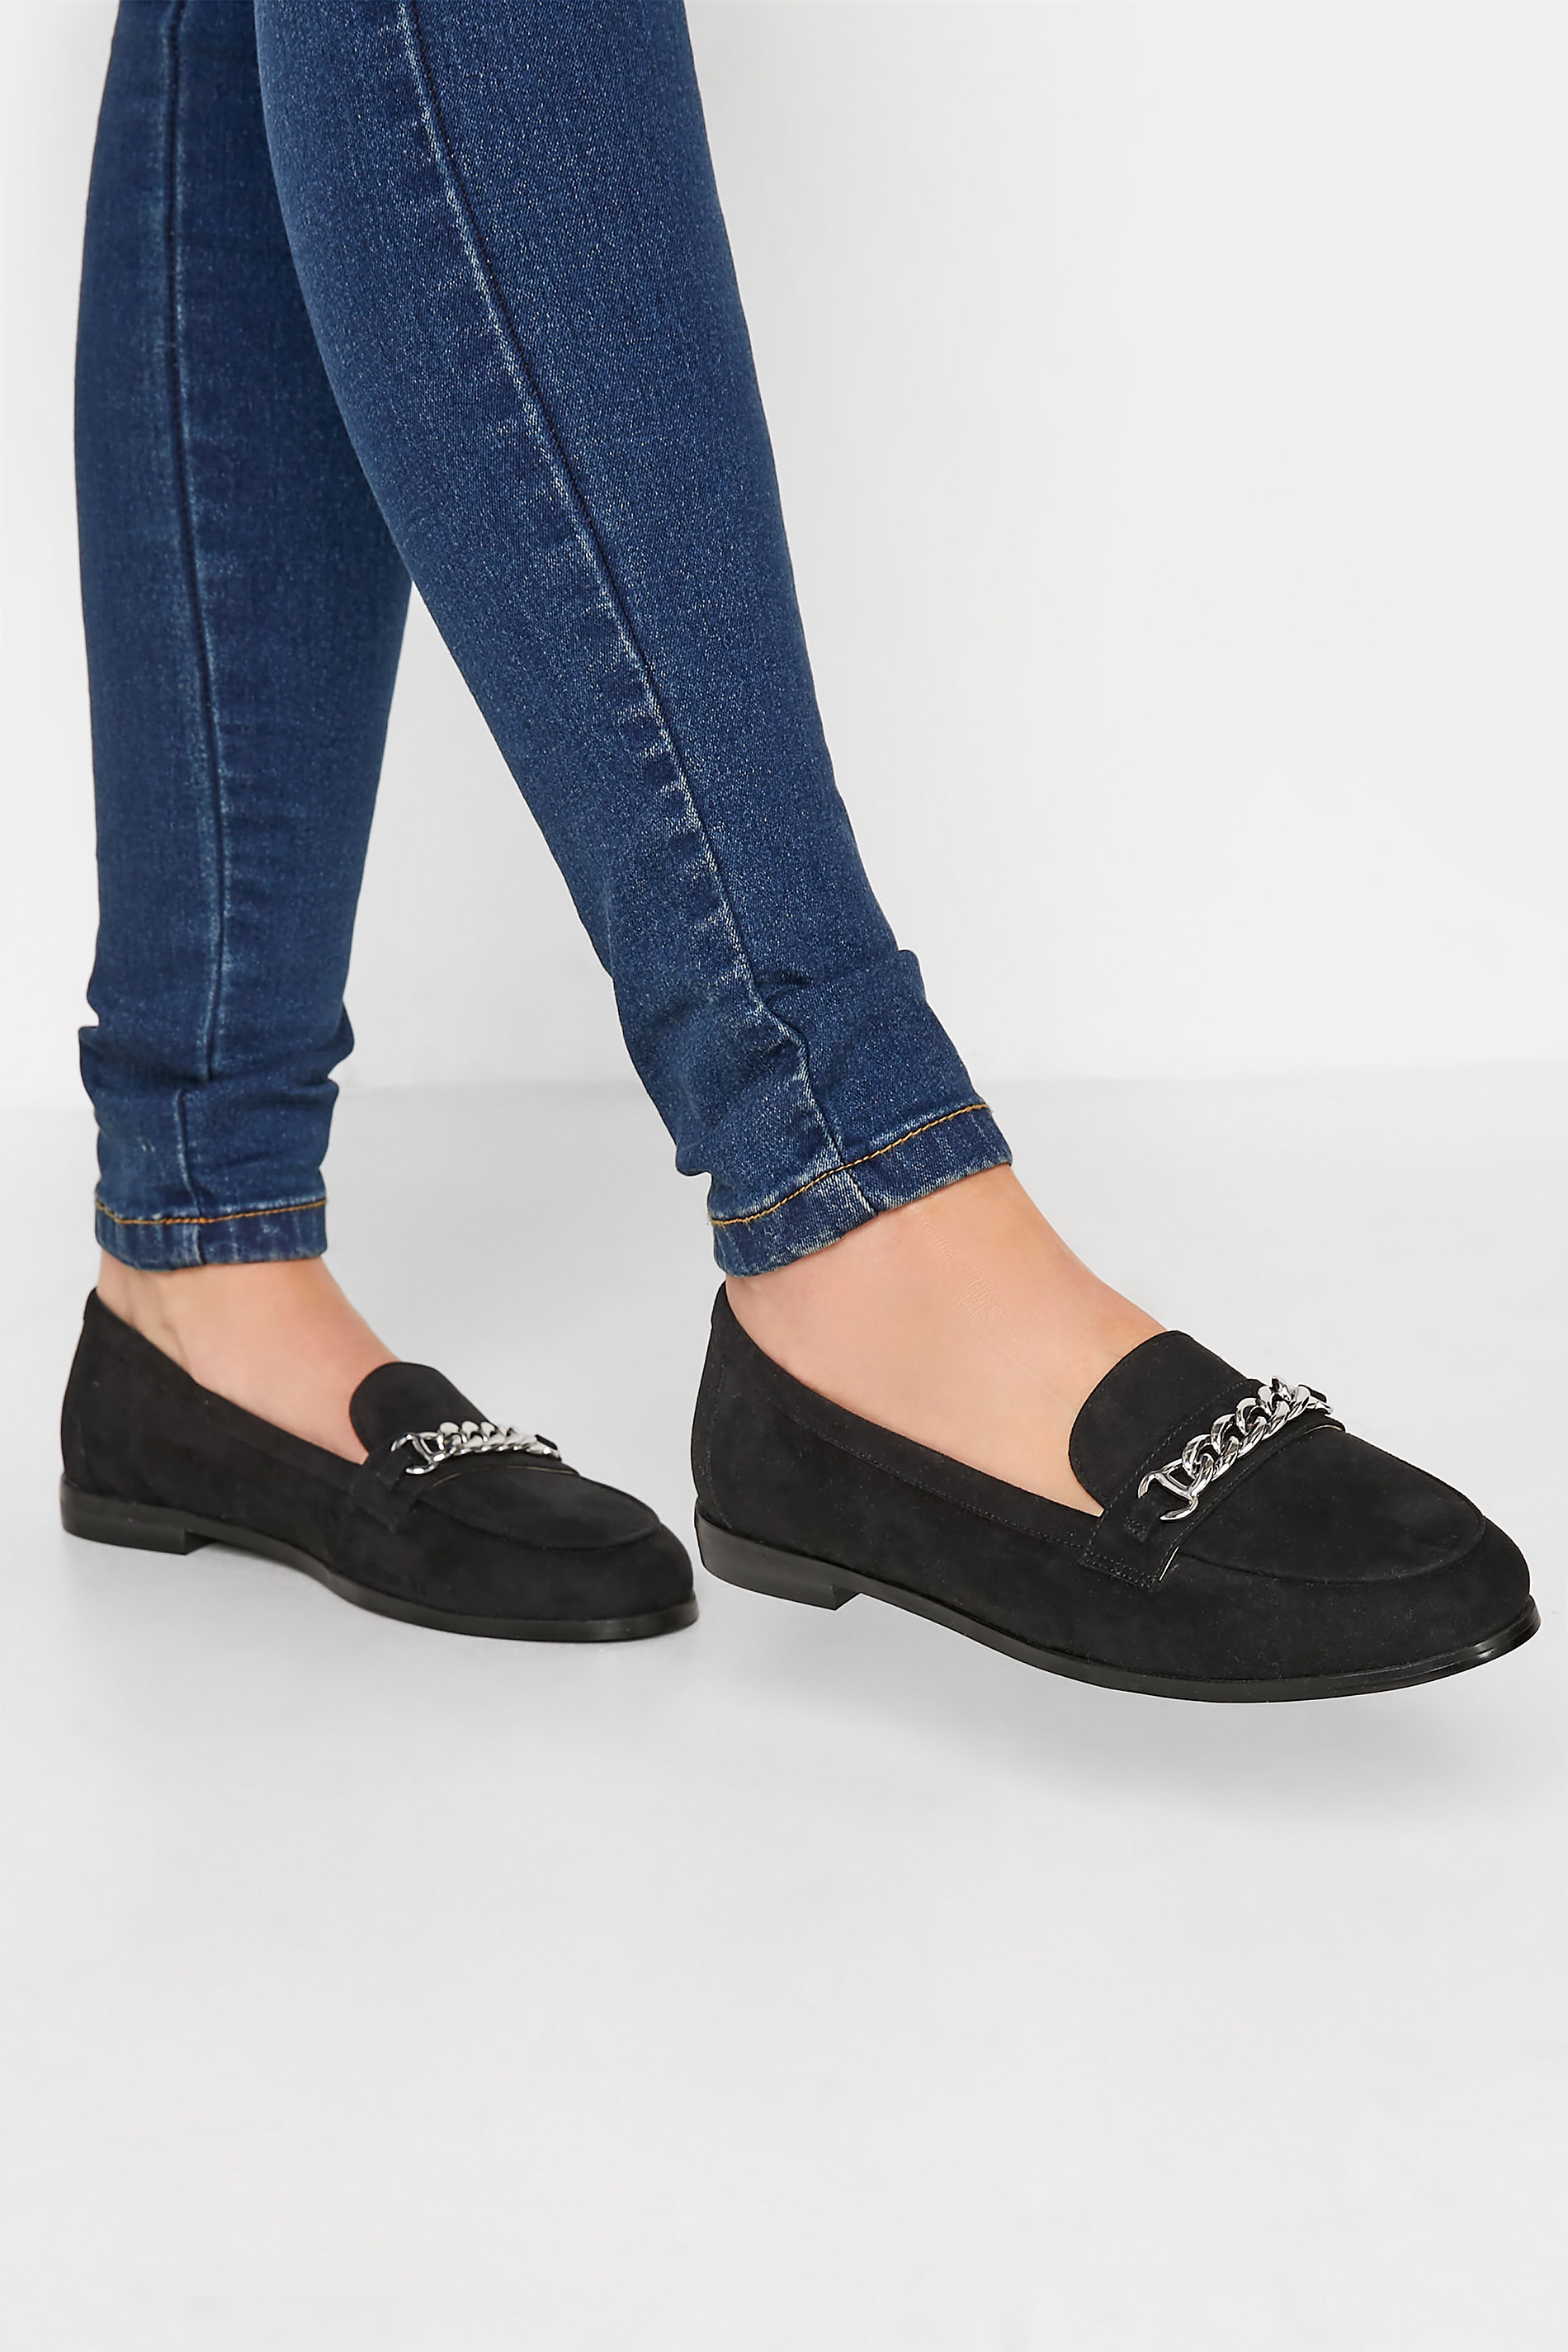 LTS Black Chain Loafers In Standard D Fit 1